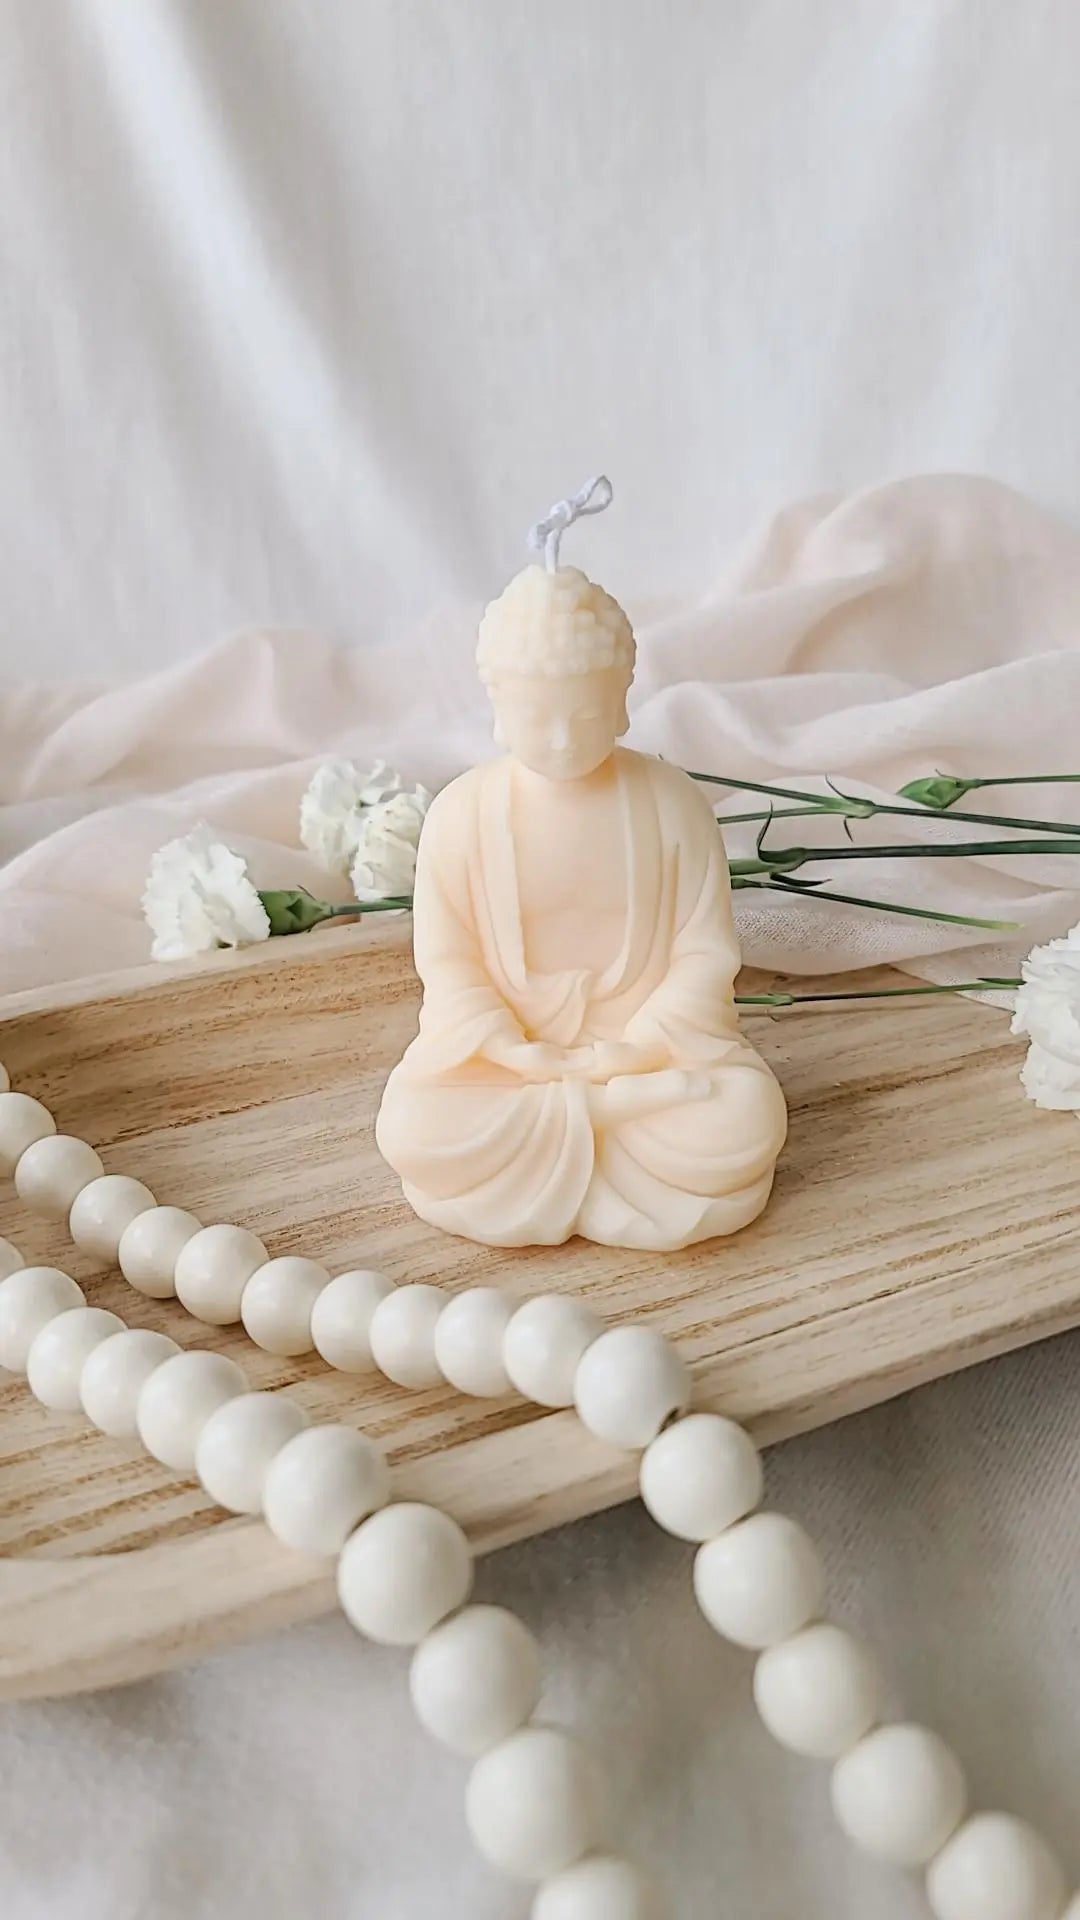 Lotus Flower Candle – Buddha And The Bees